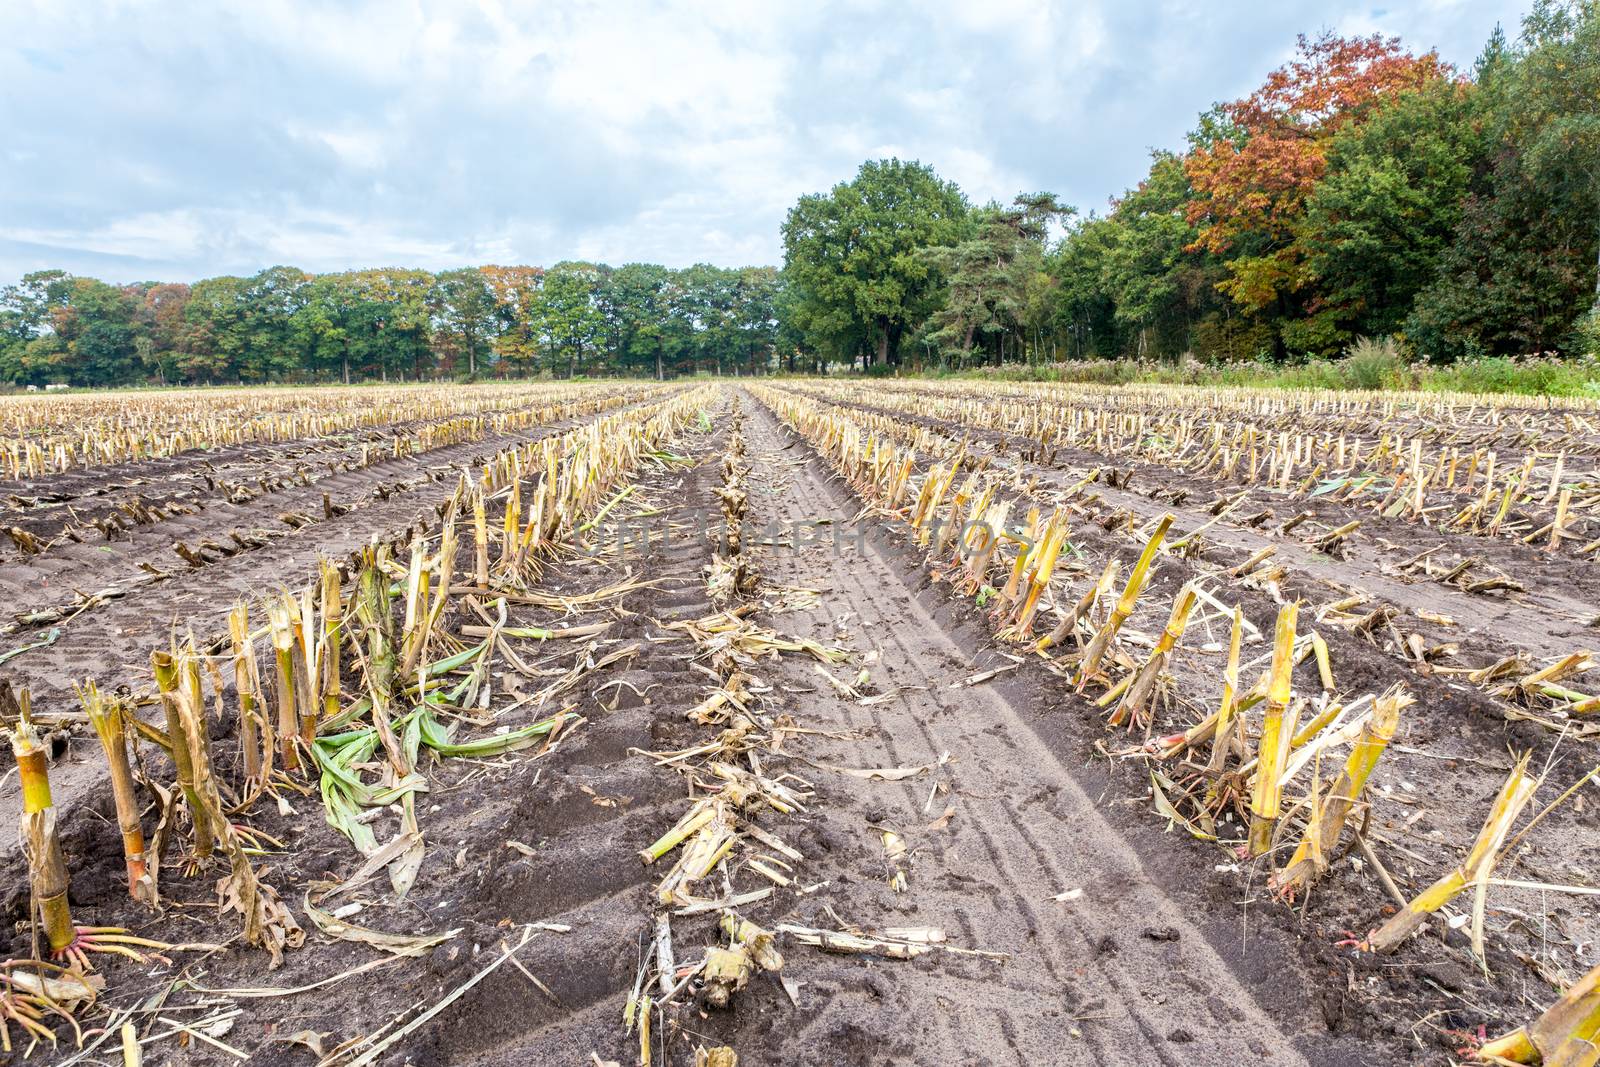 Field with rows of corn stubbles in autumn by BenSchonewille